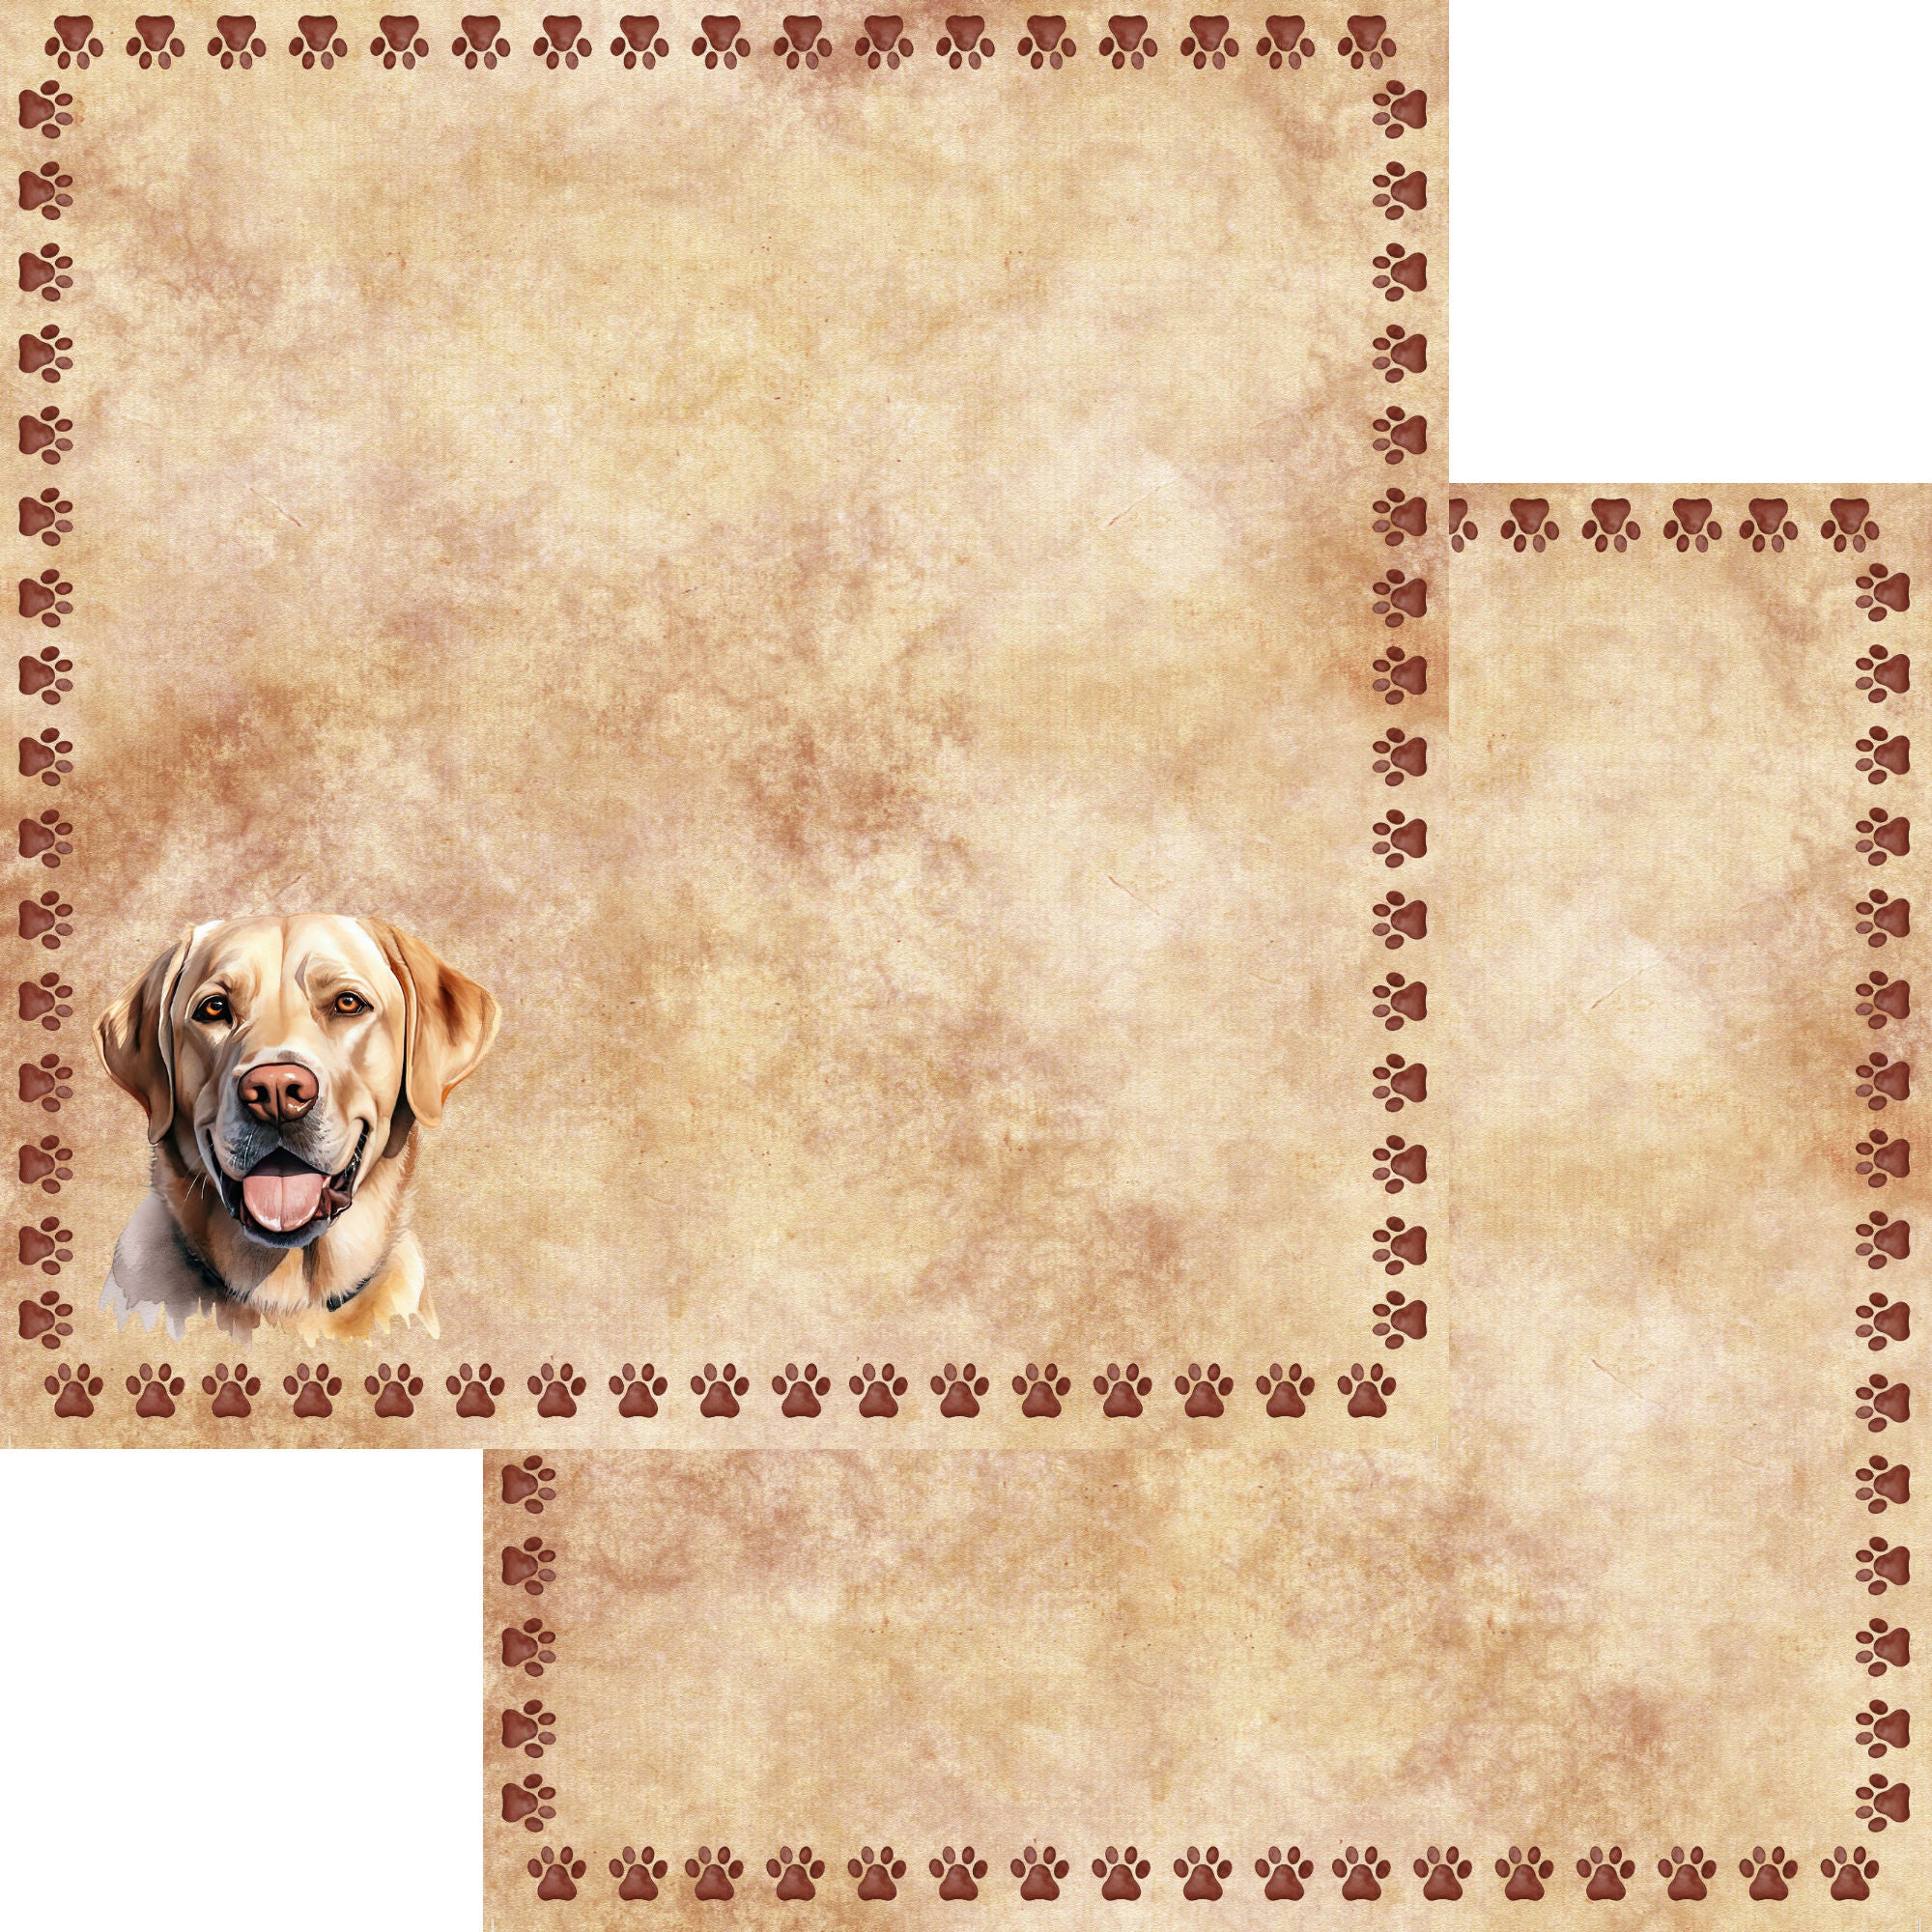 Dog Breeds Collection Labrador Retriever 12 x 12 Double-Sided Scrapbook Paper by SSC Designs